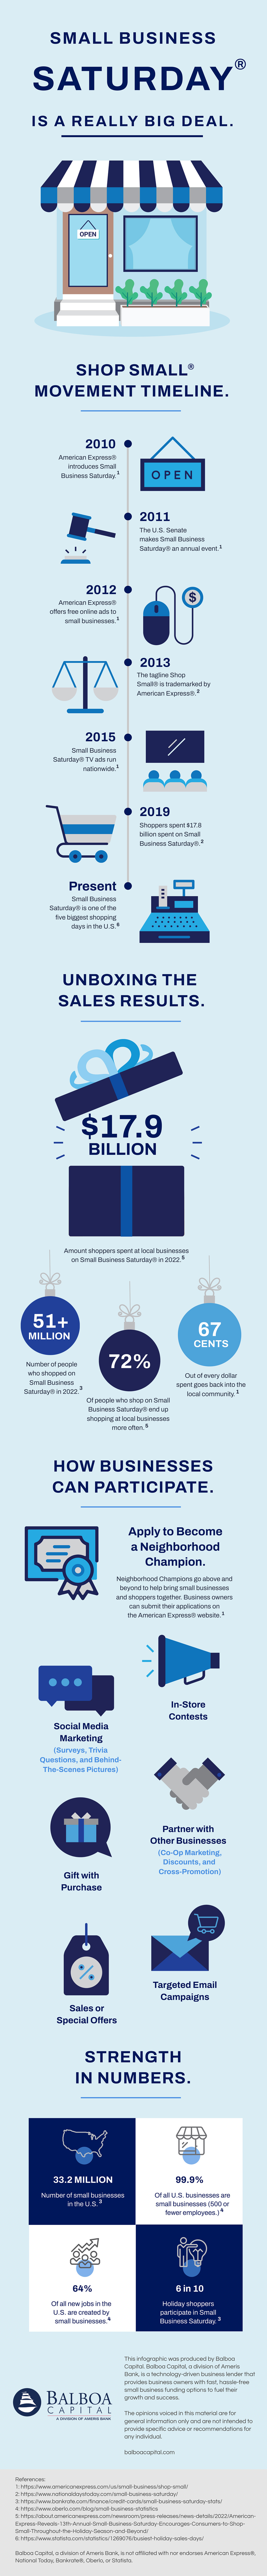 Small Business Saturday Infographic